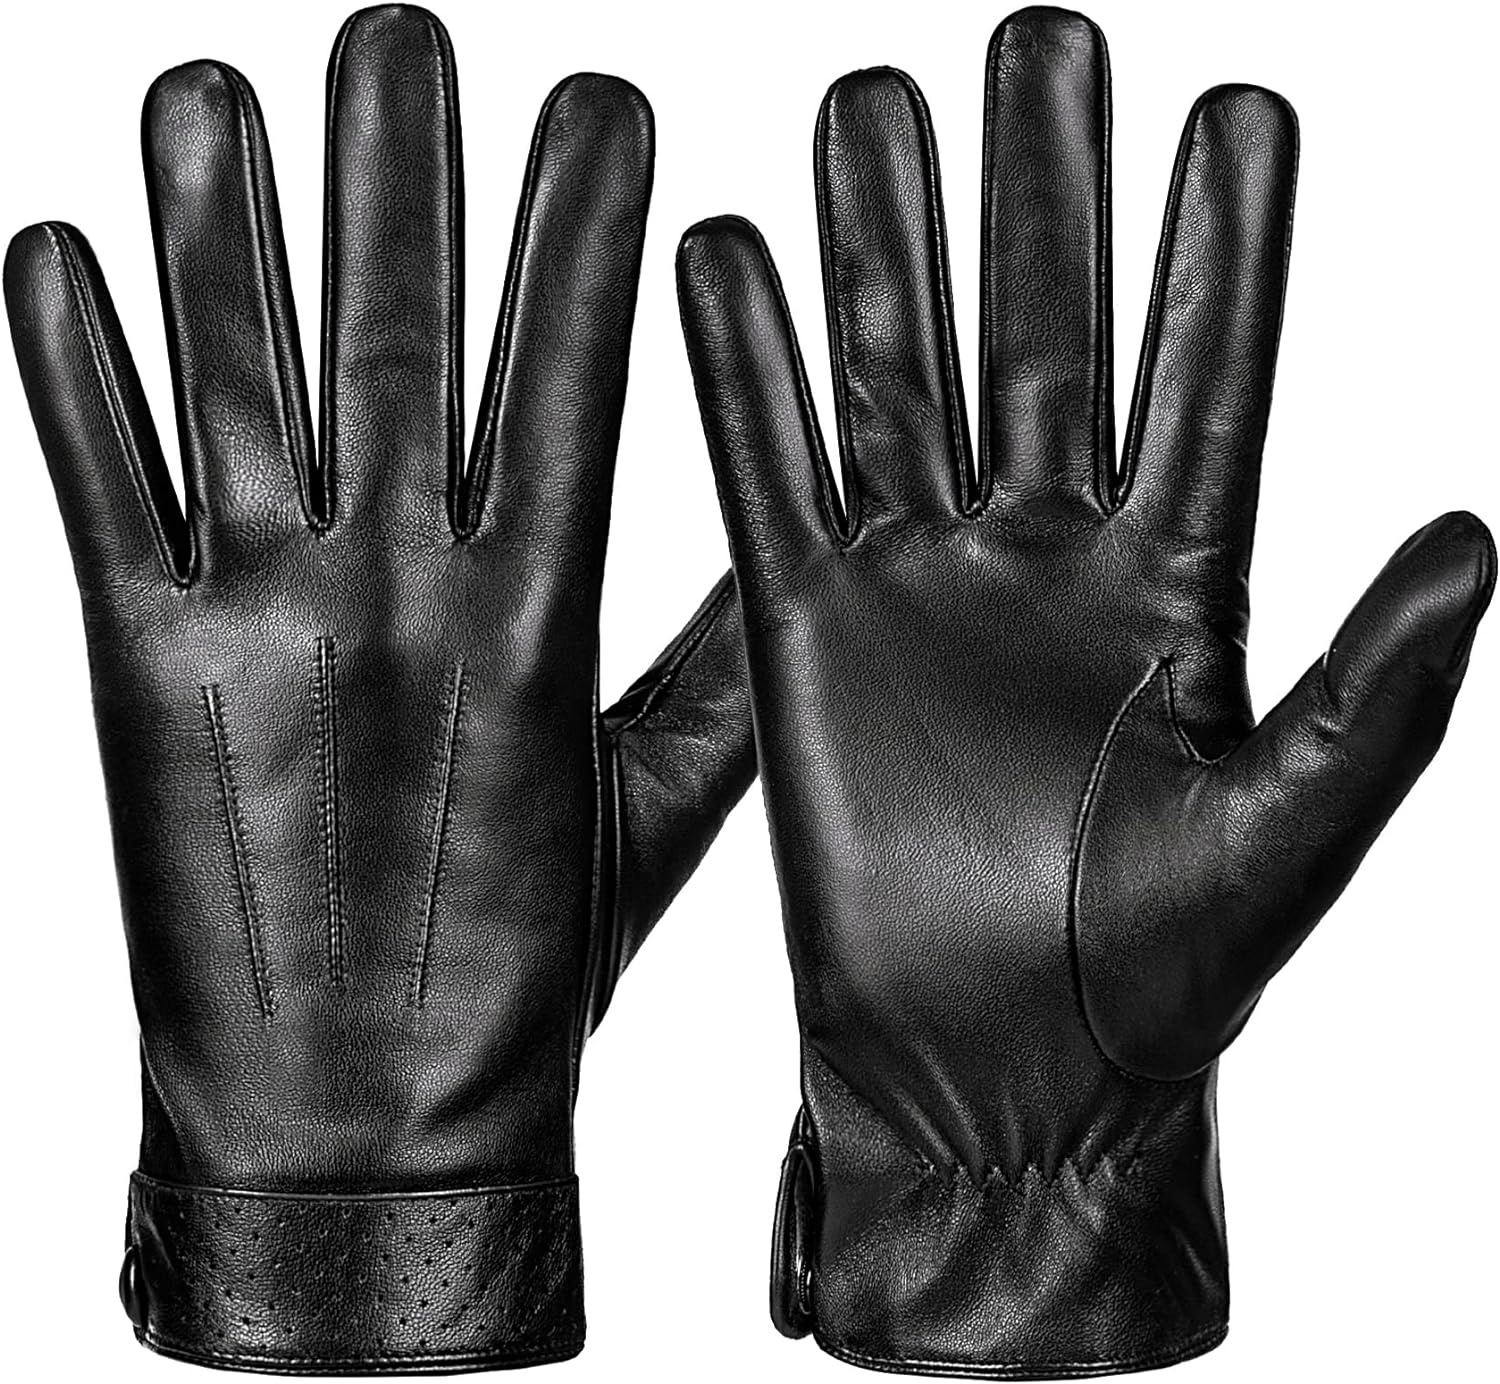 Whiteleopard Men's Winter Sheepskin Leather Gloves, Toasty Touchscreen Texting with Cashmere Lining, Ideal for Driving and Motorcycle Riding - image 1 of 7